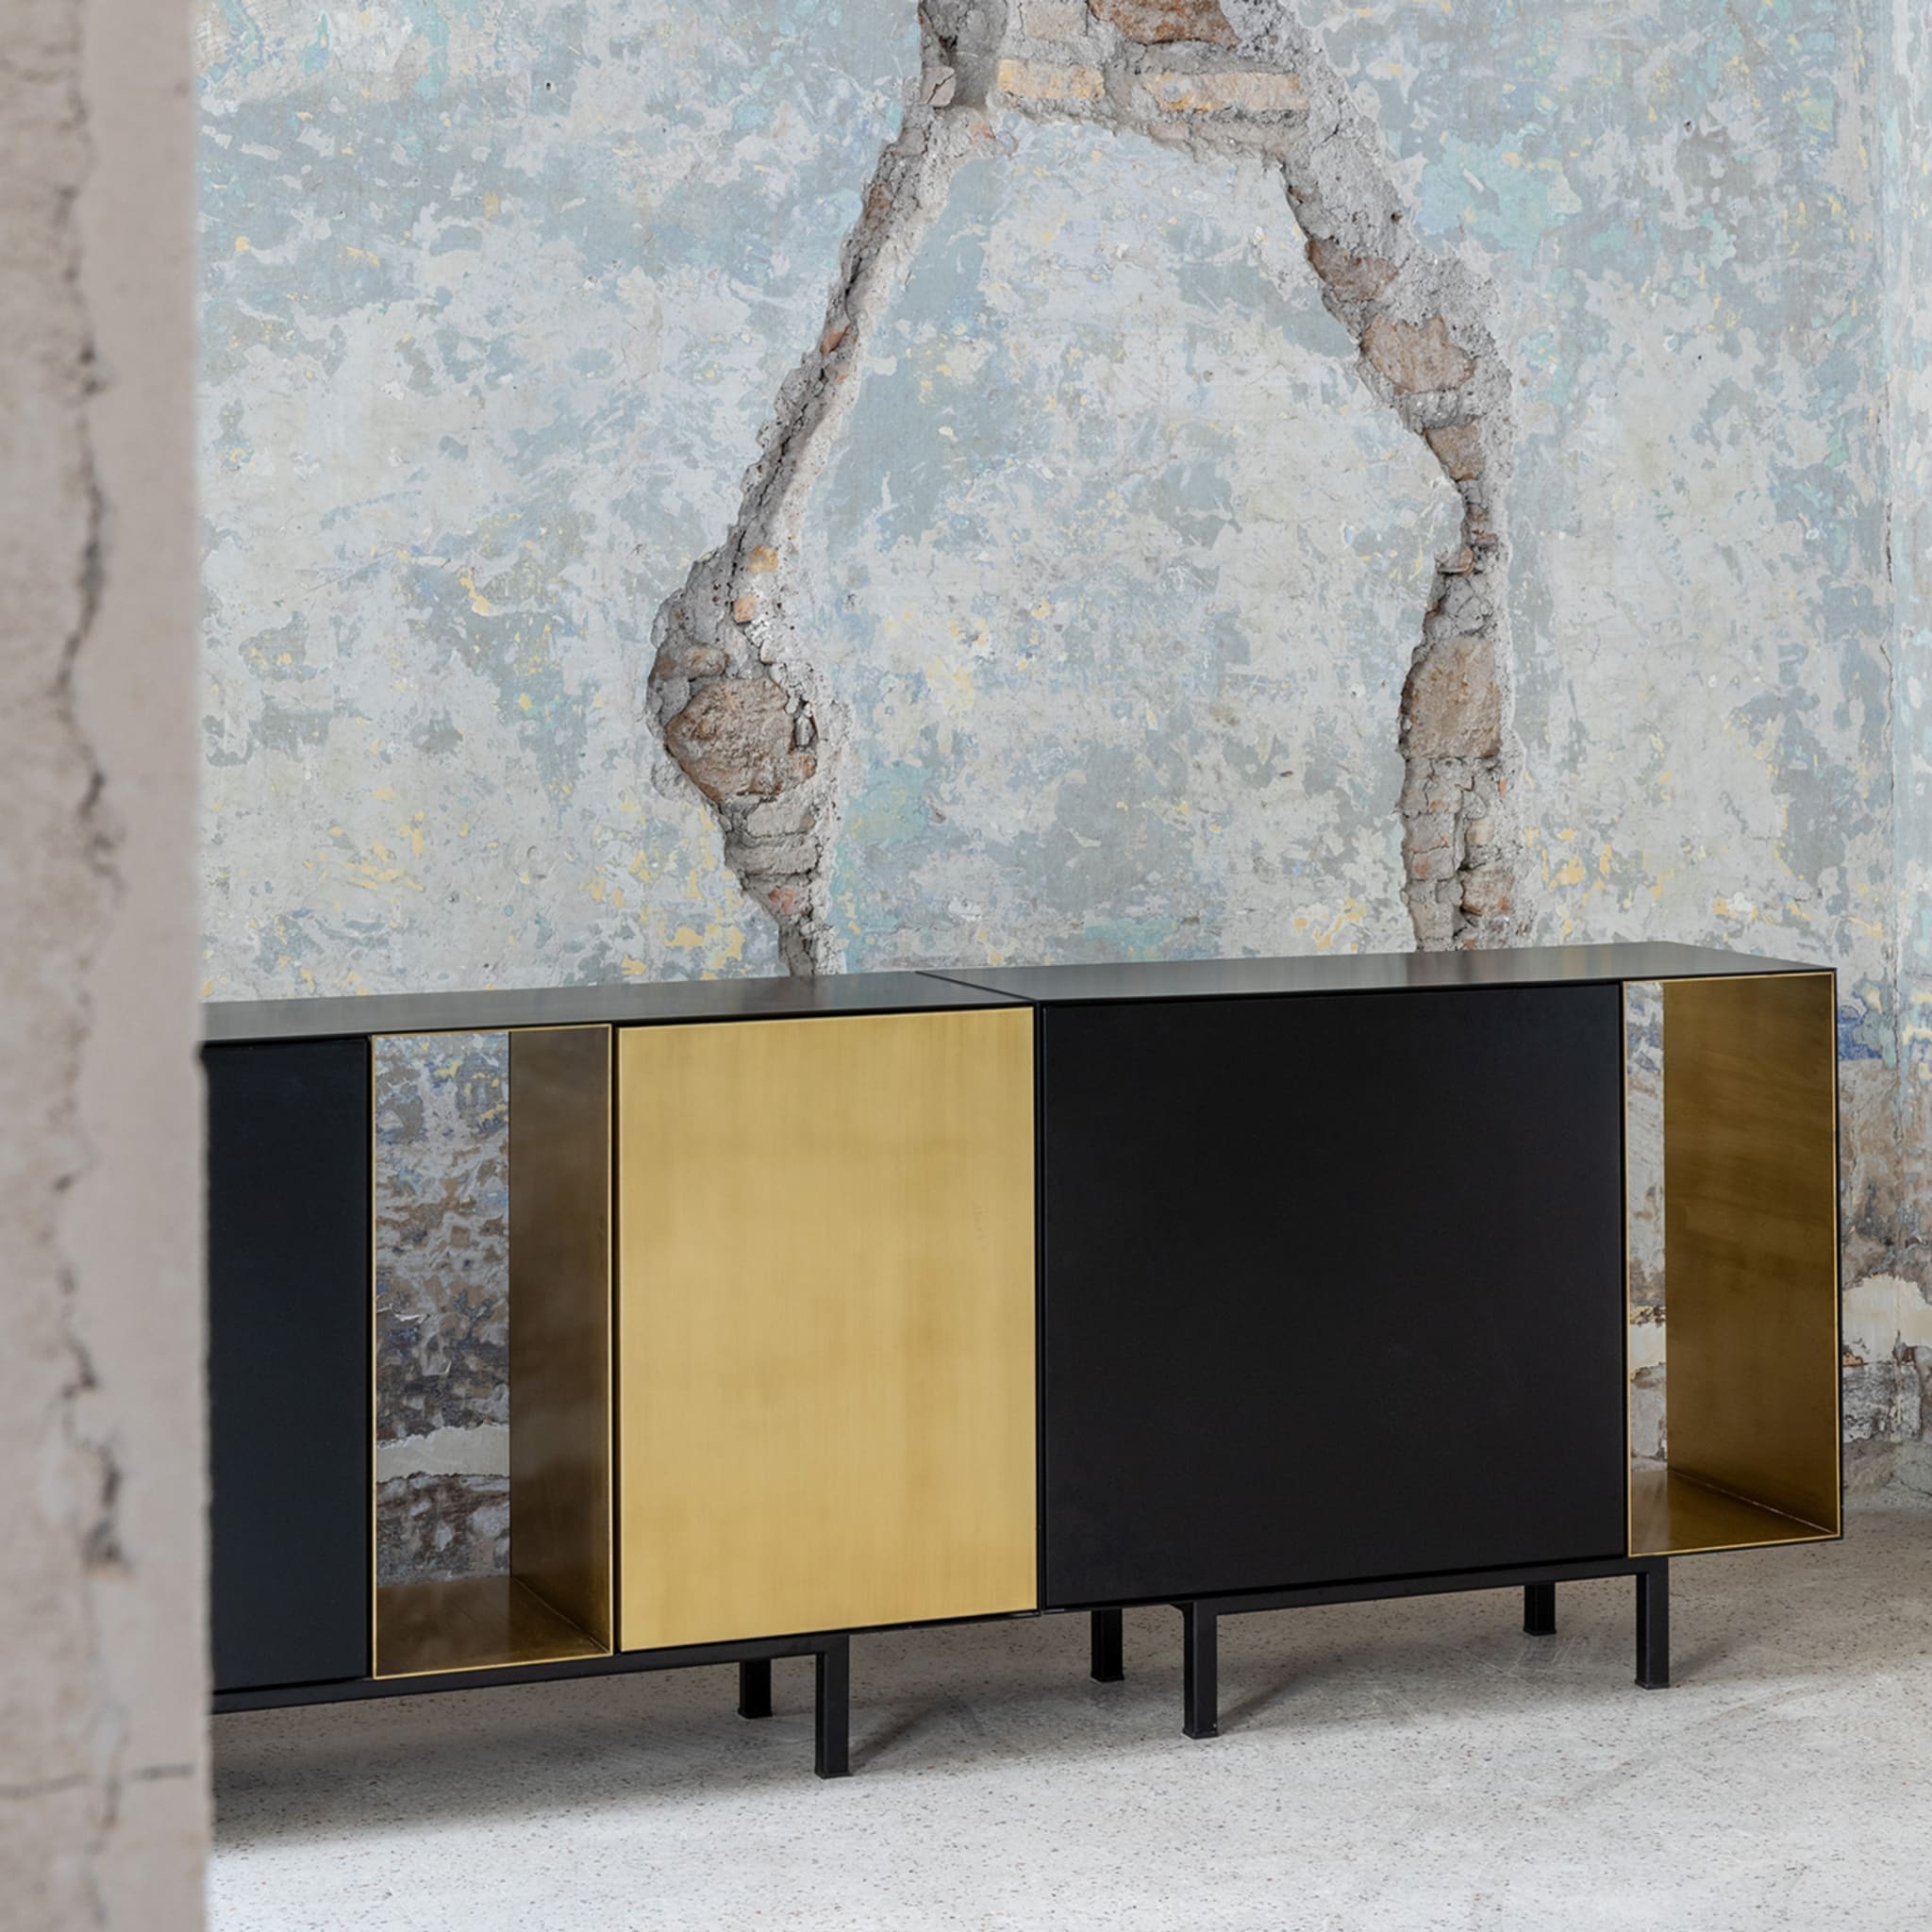 PAOLO 01-02 Sideboard - Alternative view 1